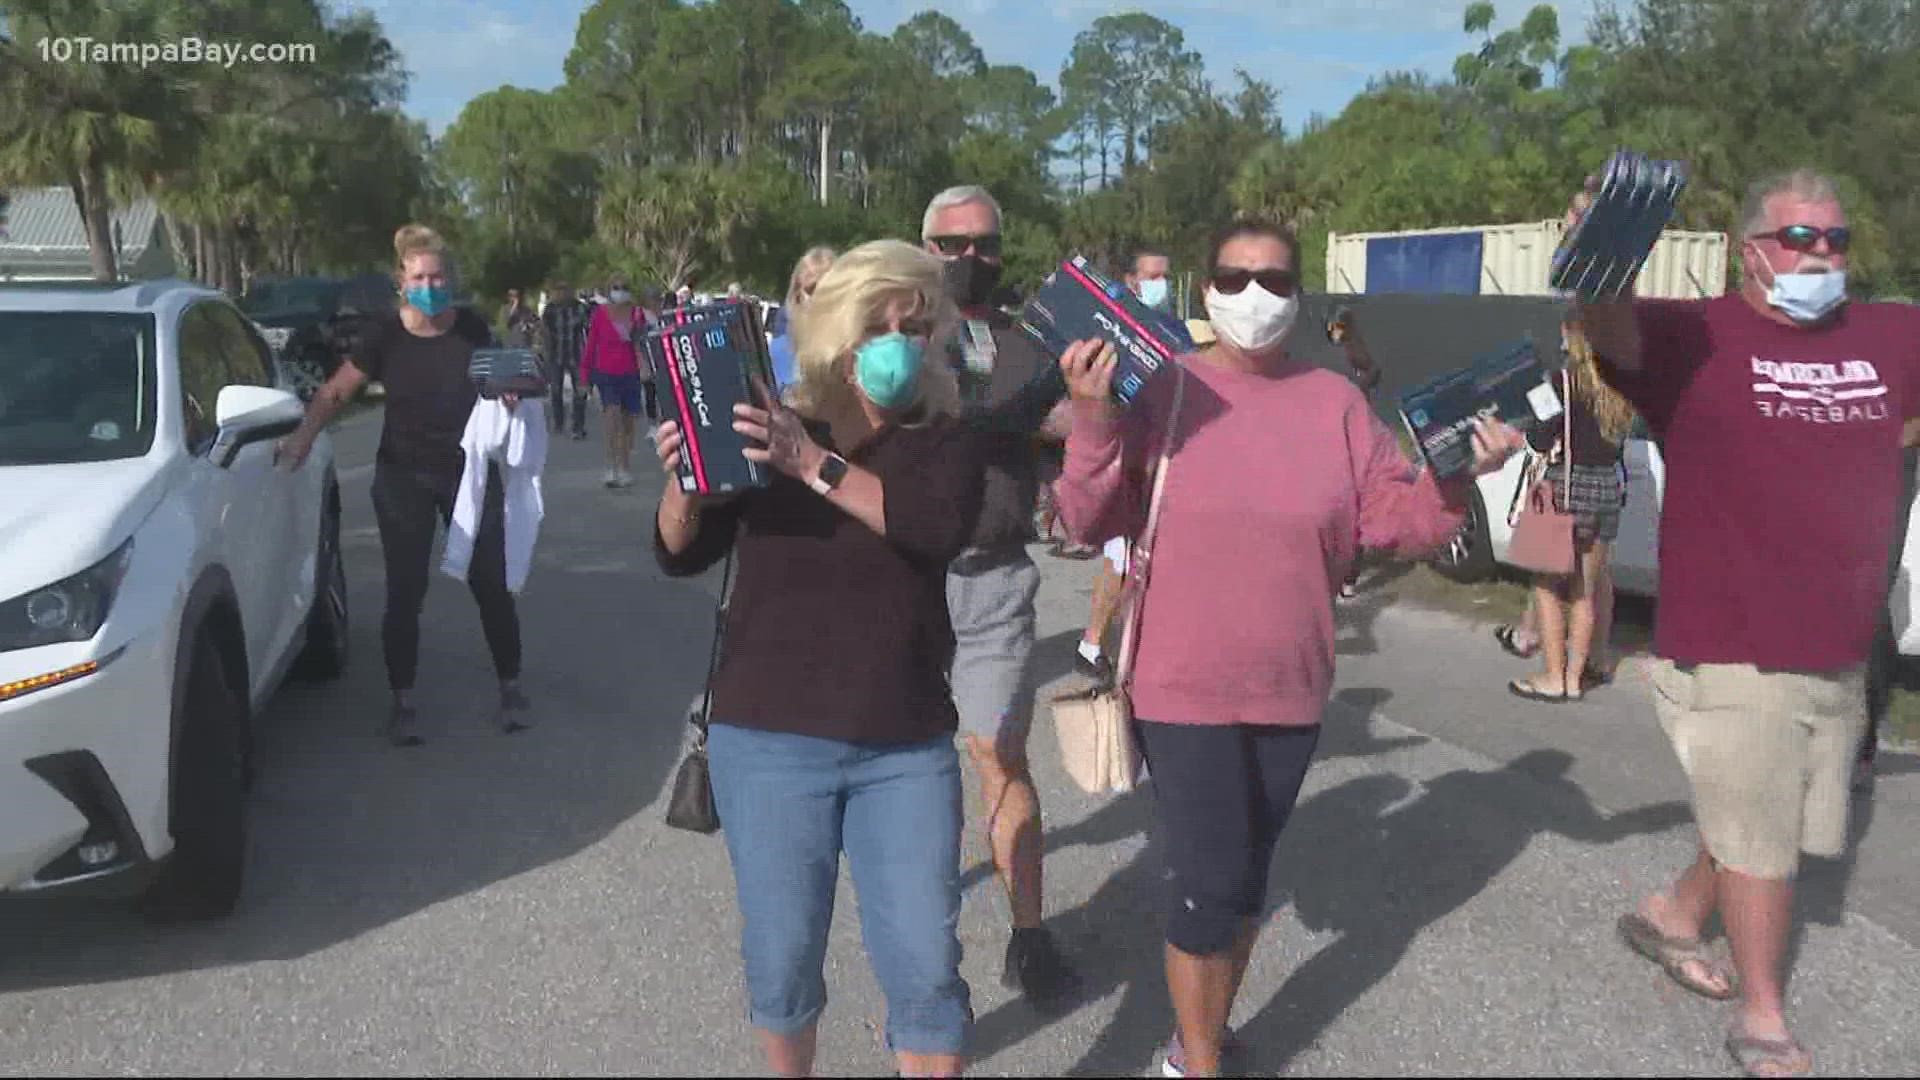 In an effort to meet the demand in COVID-19 testing due to the spread of the omicron variant, Manatee County leaders gave out thousands of testing kits.